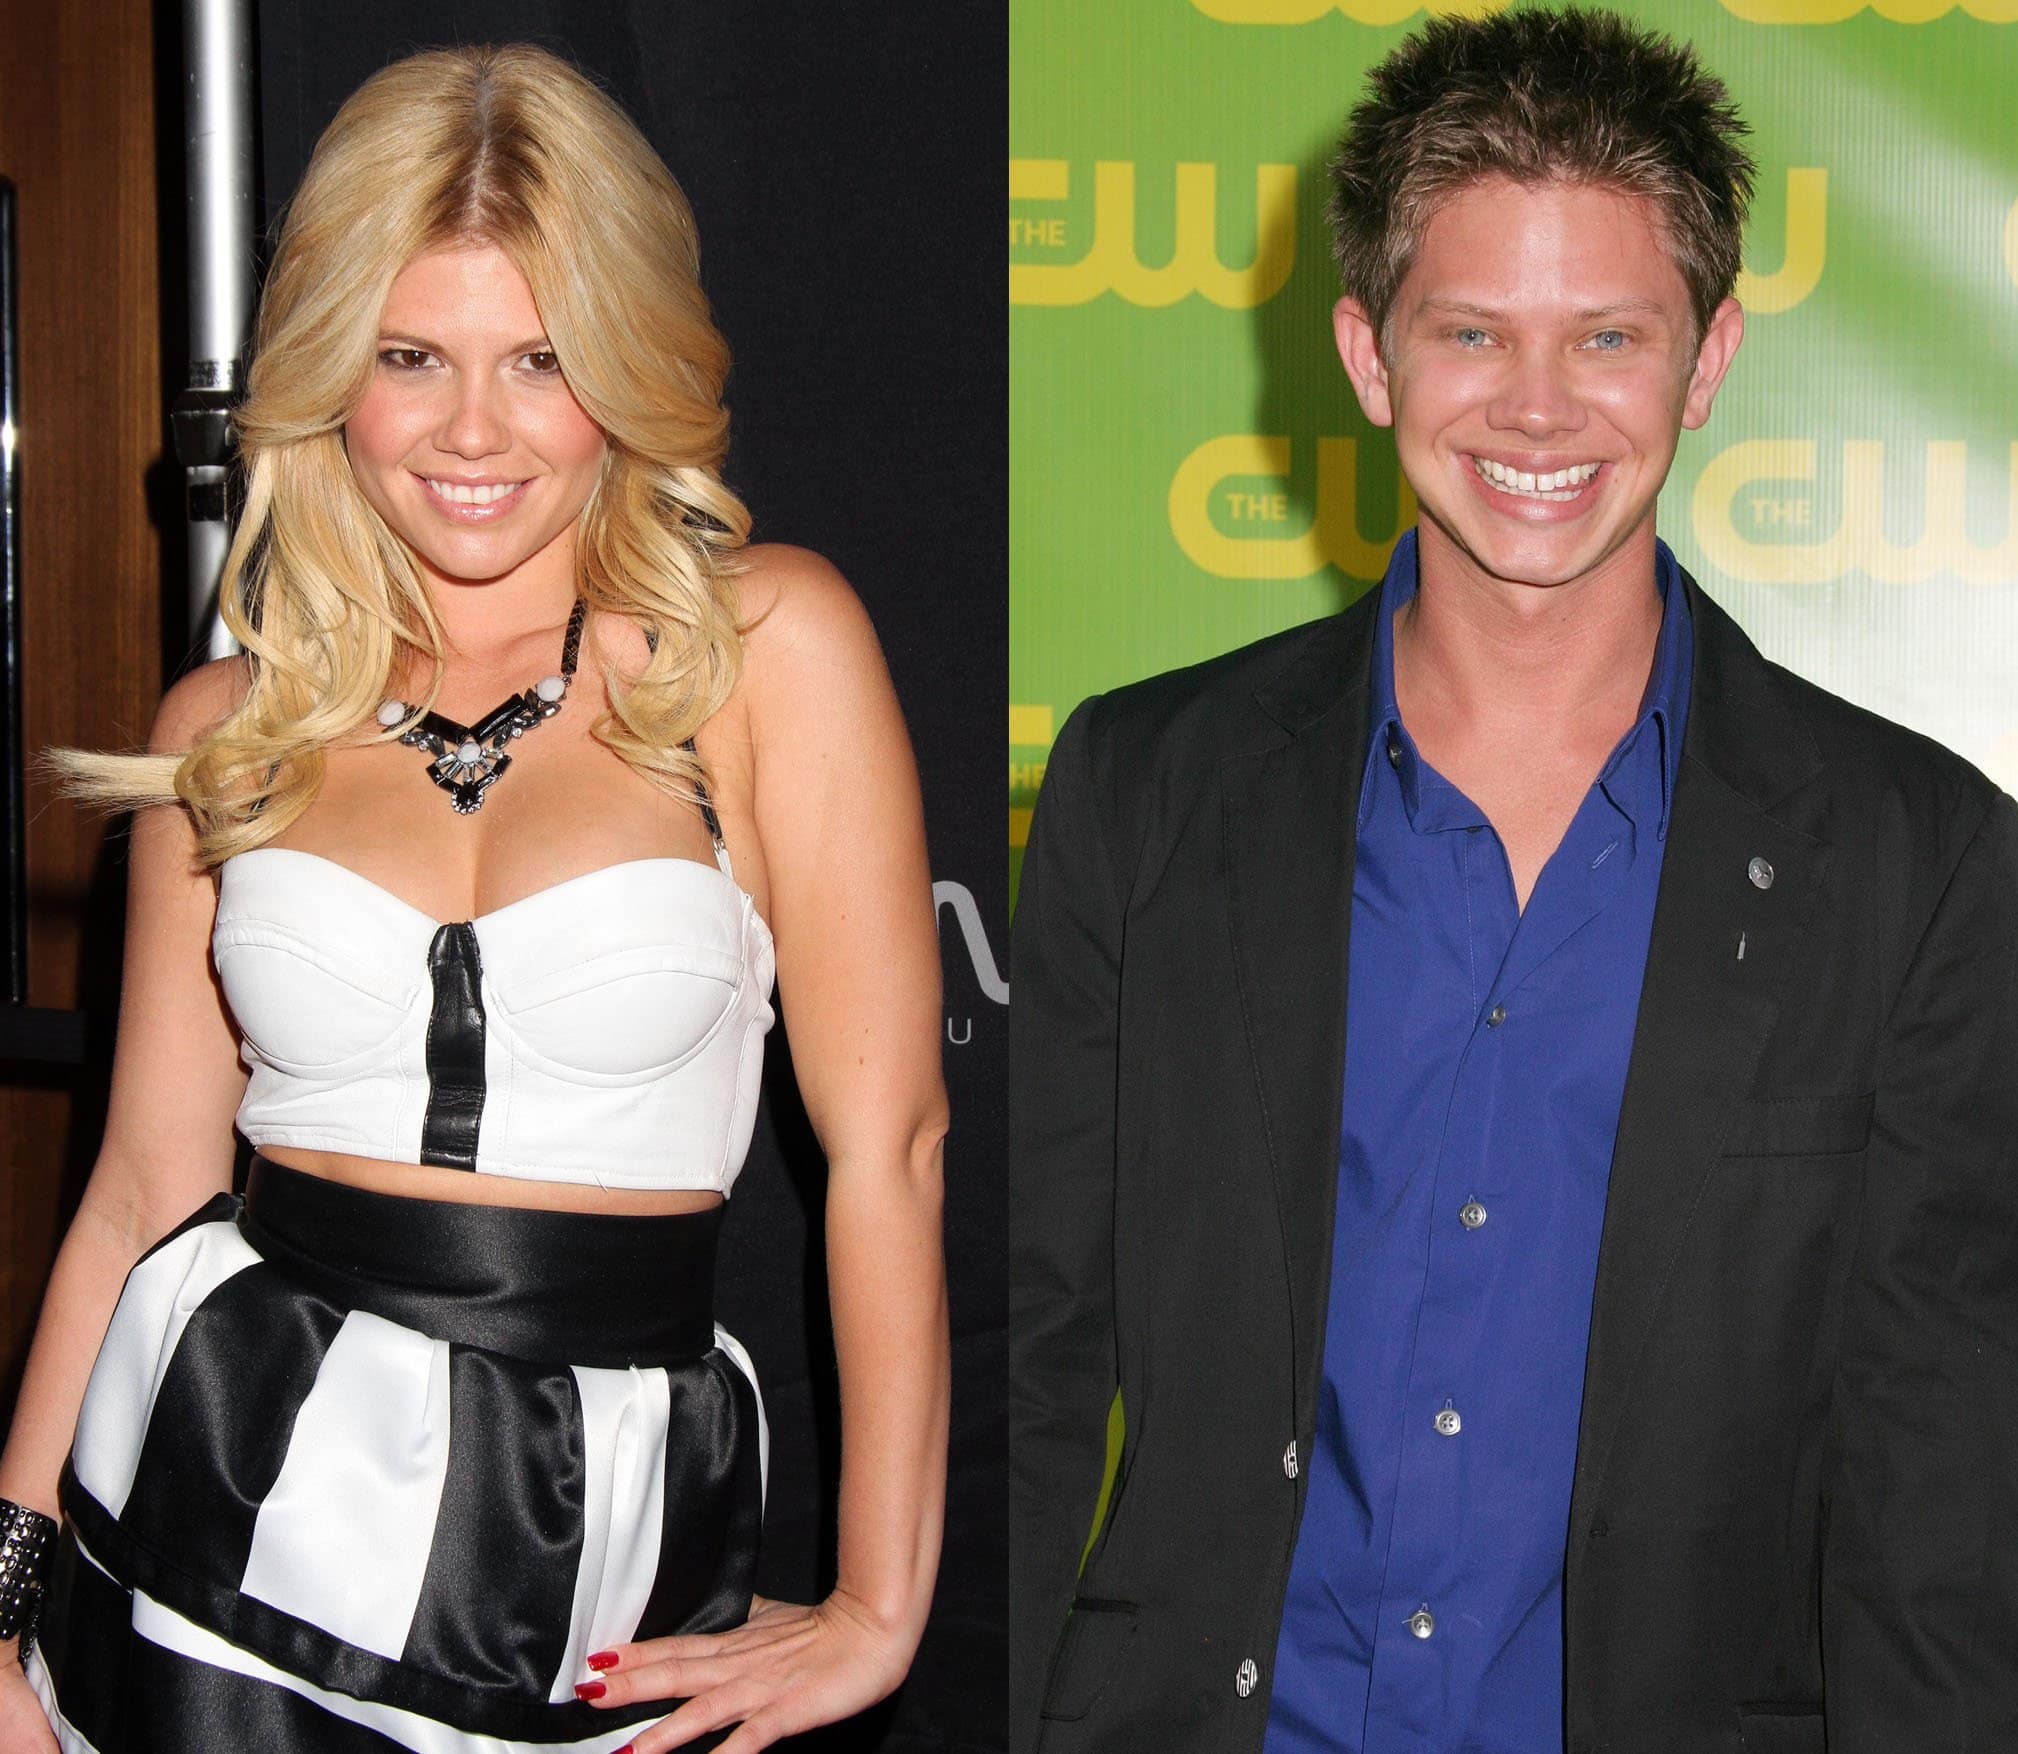 Memes stating Lee Norris had a sex-swap surgery to become Chanel West Coast circulated in 2015 after fans notice their resemblance